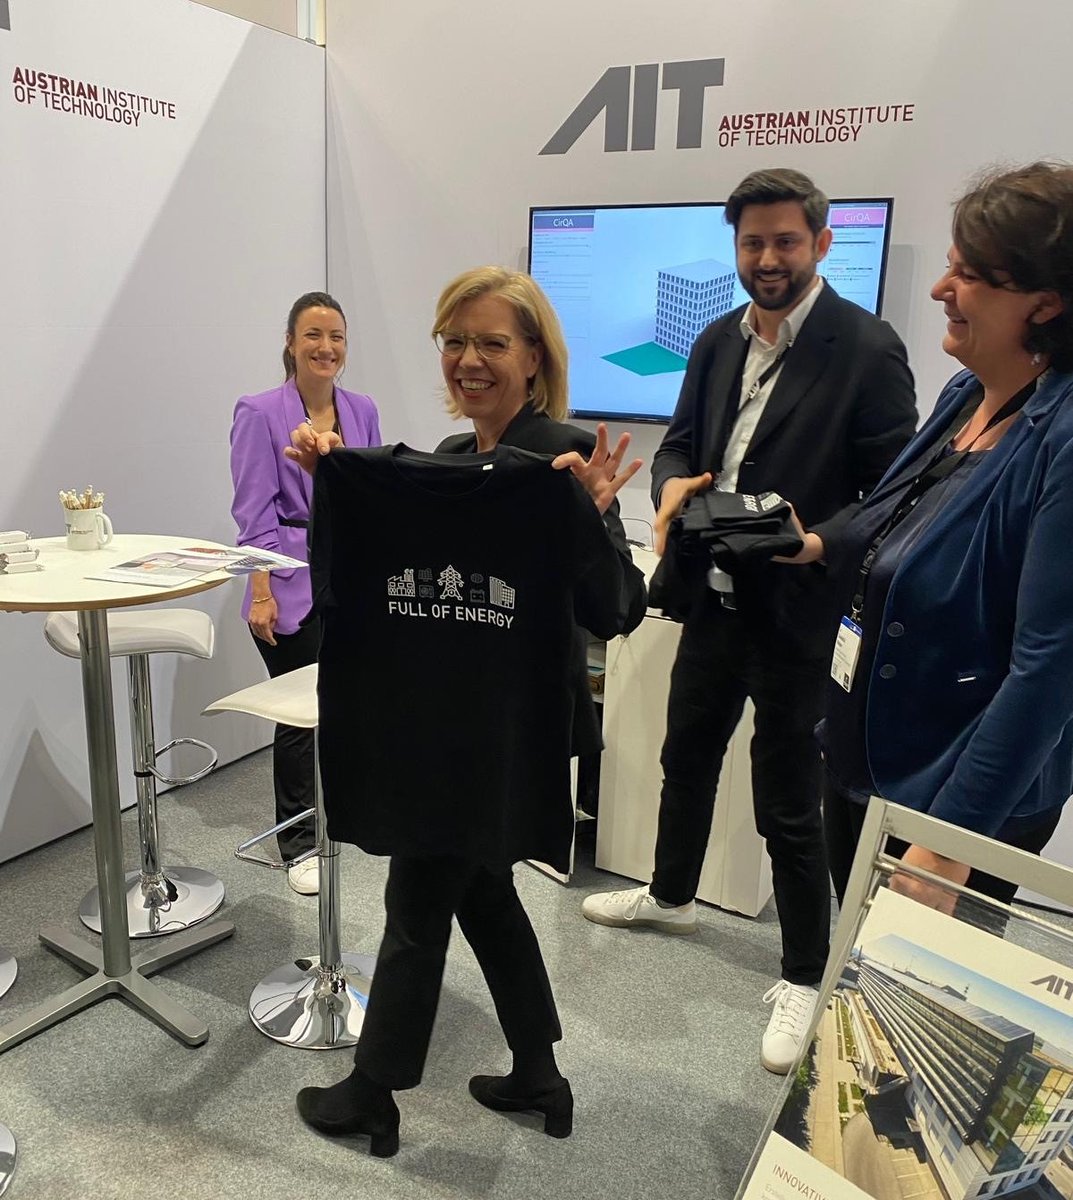 What a successful start at the Hannover Fair 2024! We were thrilled to welcome Leonore Gewessler, Minister for Climate Action, Environment, Energy, Mobility, Innovation and Technology at our booth. Visit us: Hall 11, Booth A39, Austria Pavilion. Let's shape the future together!